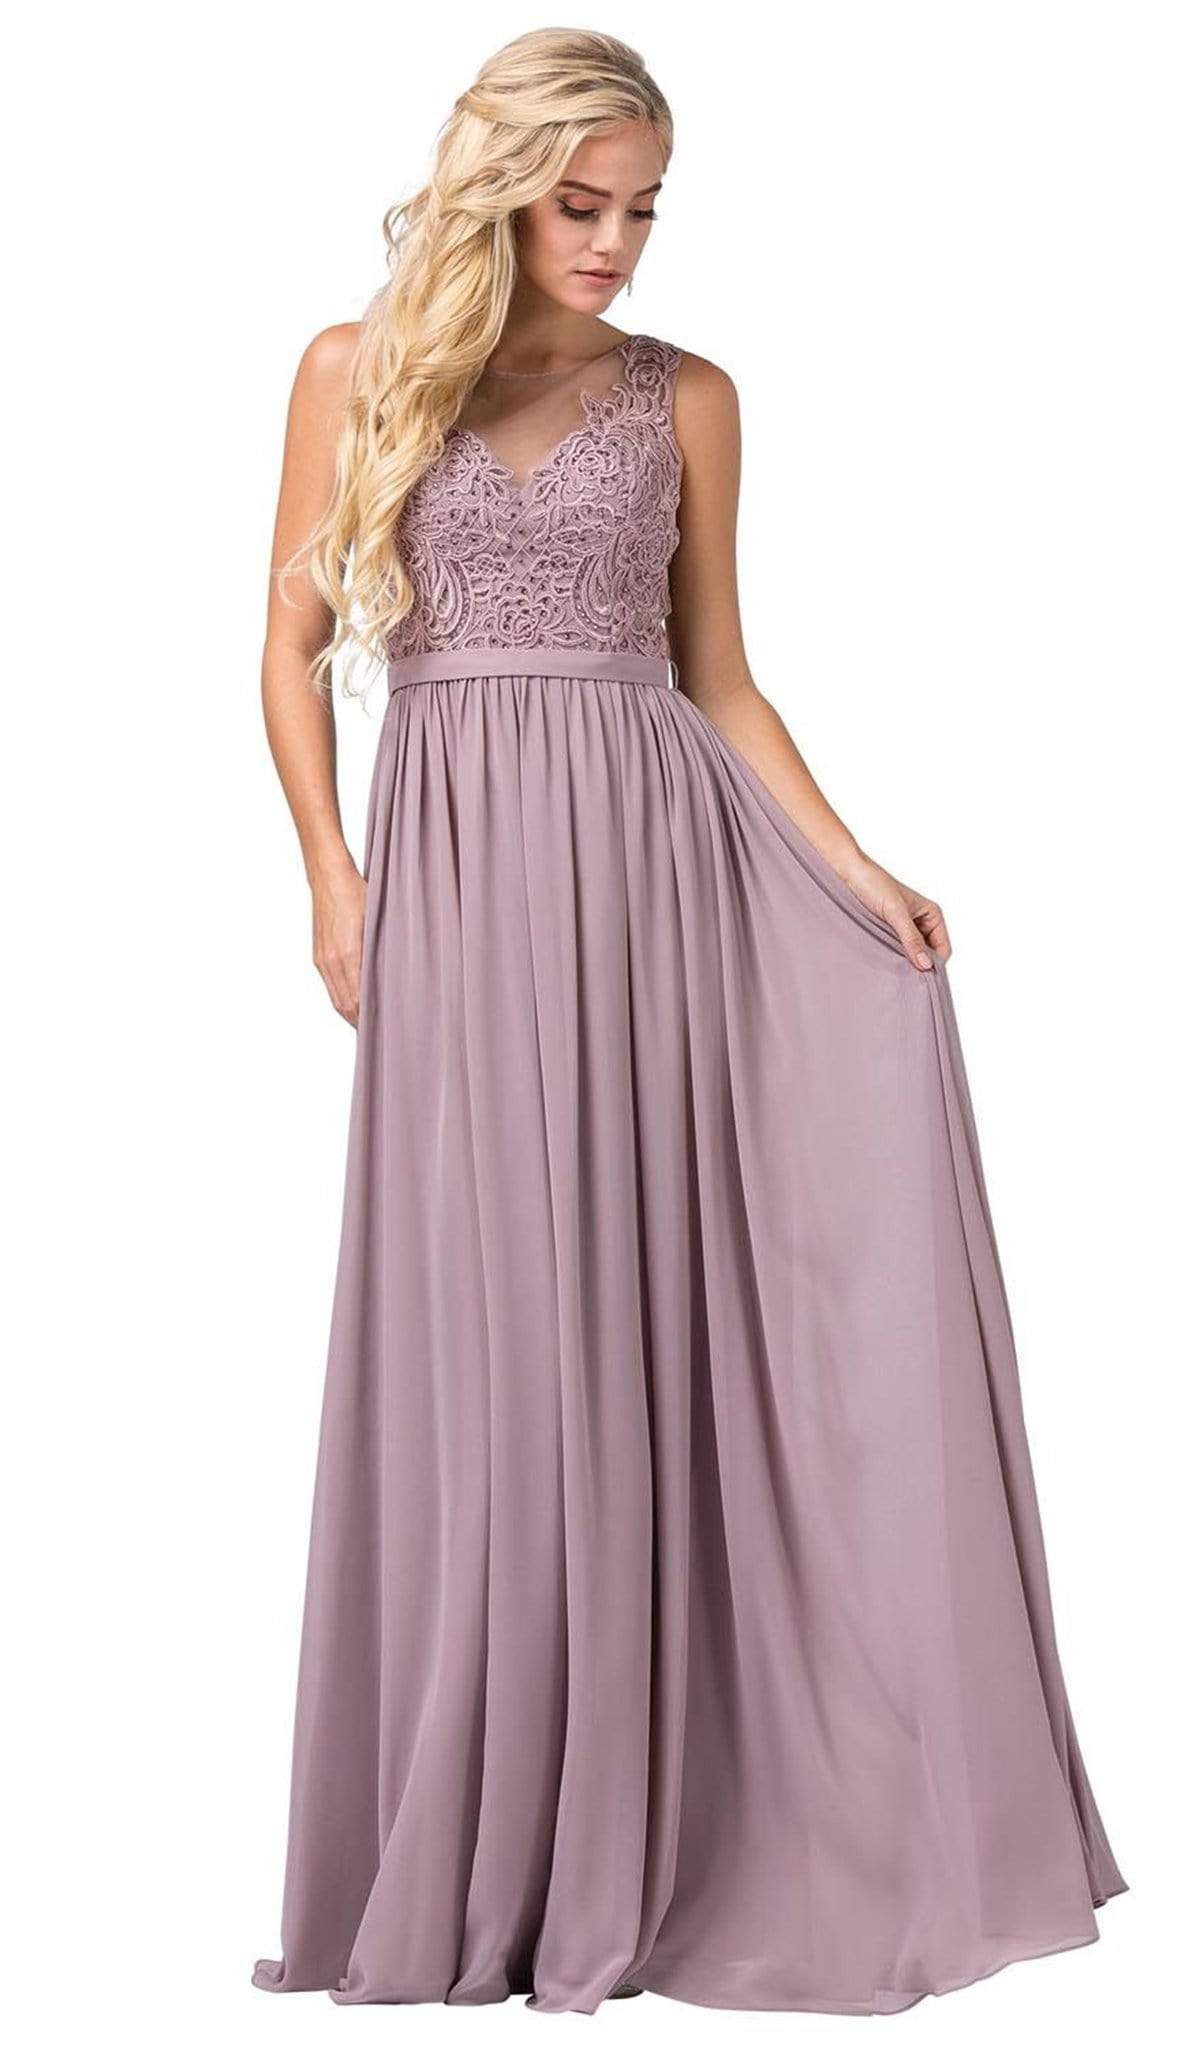 Dancing Queen - 2677 Illusion Neckline Beaded Lace Bodice Chiffon Gown Evening Dresses XS / Mocha